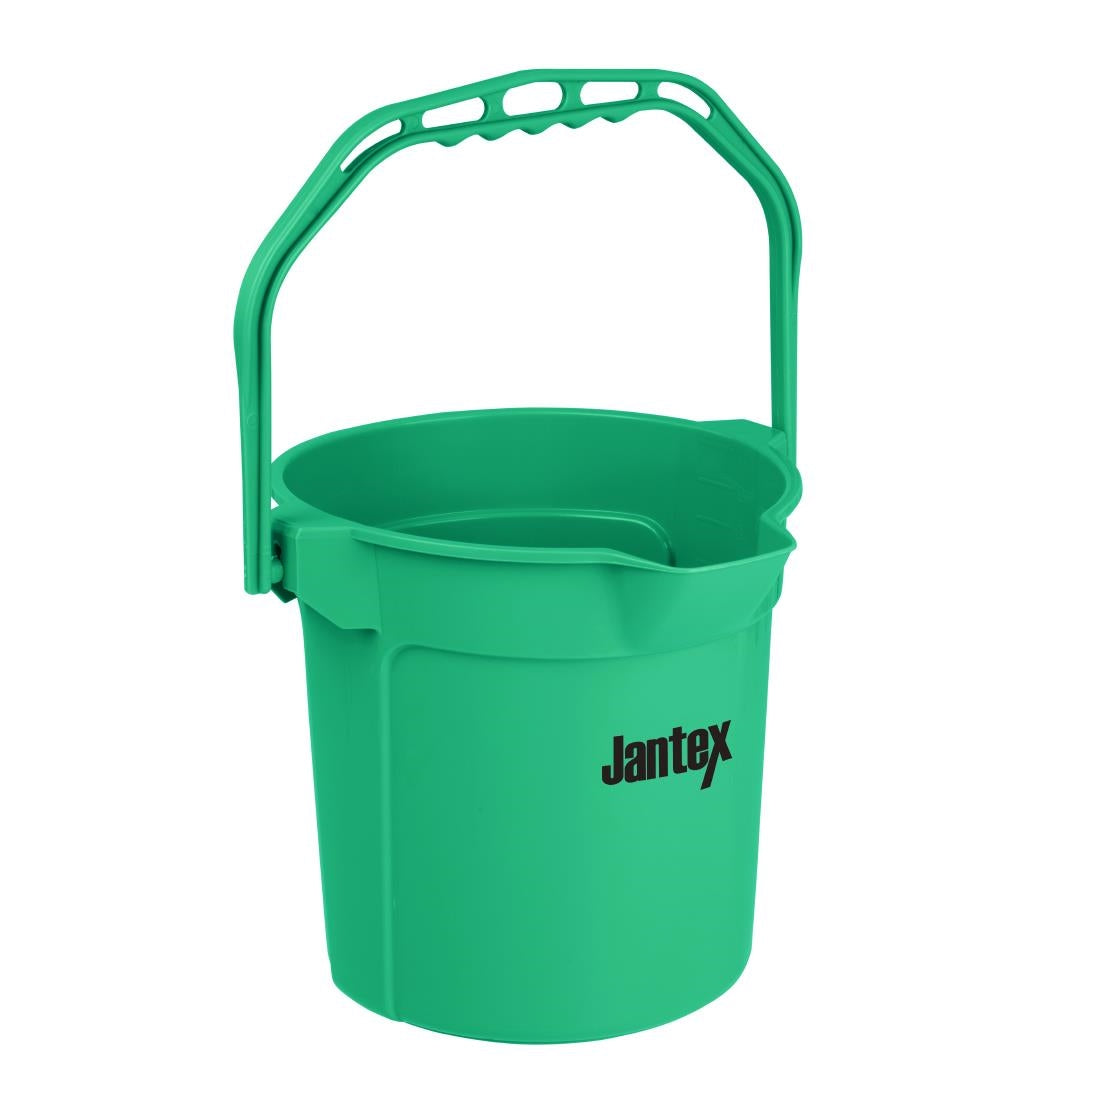 FU833 Jantex Green Graduated Bucket with Pouring Lip 10ltr